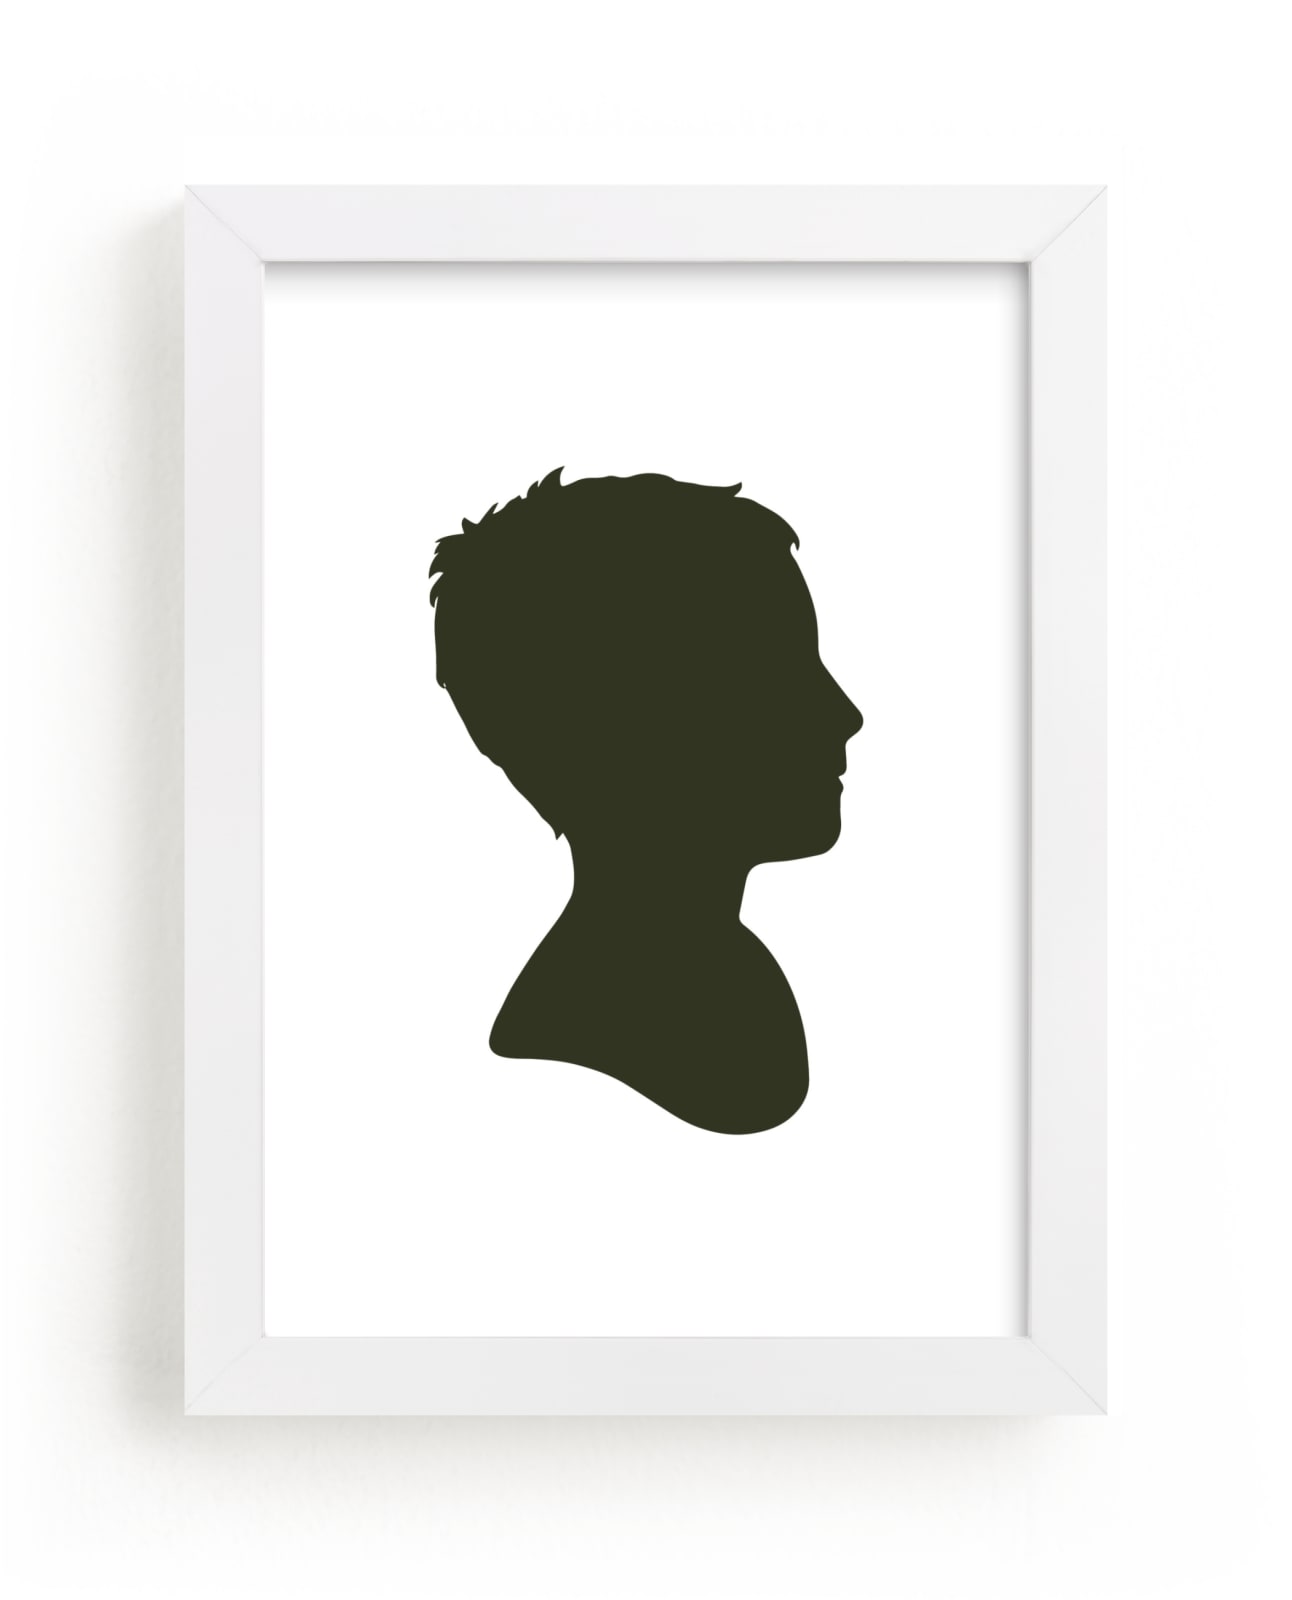 This is a black silhouette art by Minted called Custom Silhouette Art.